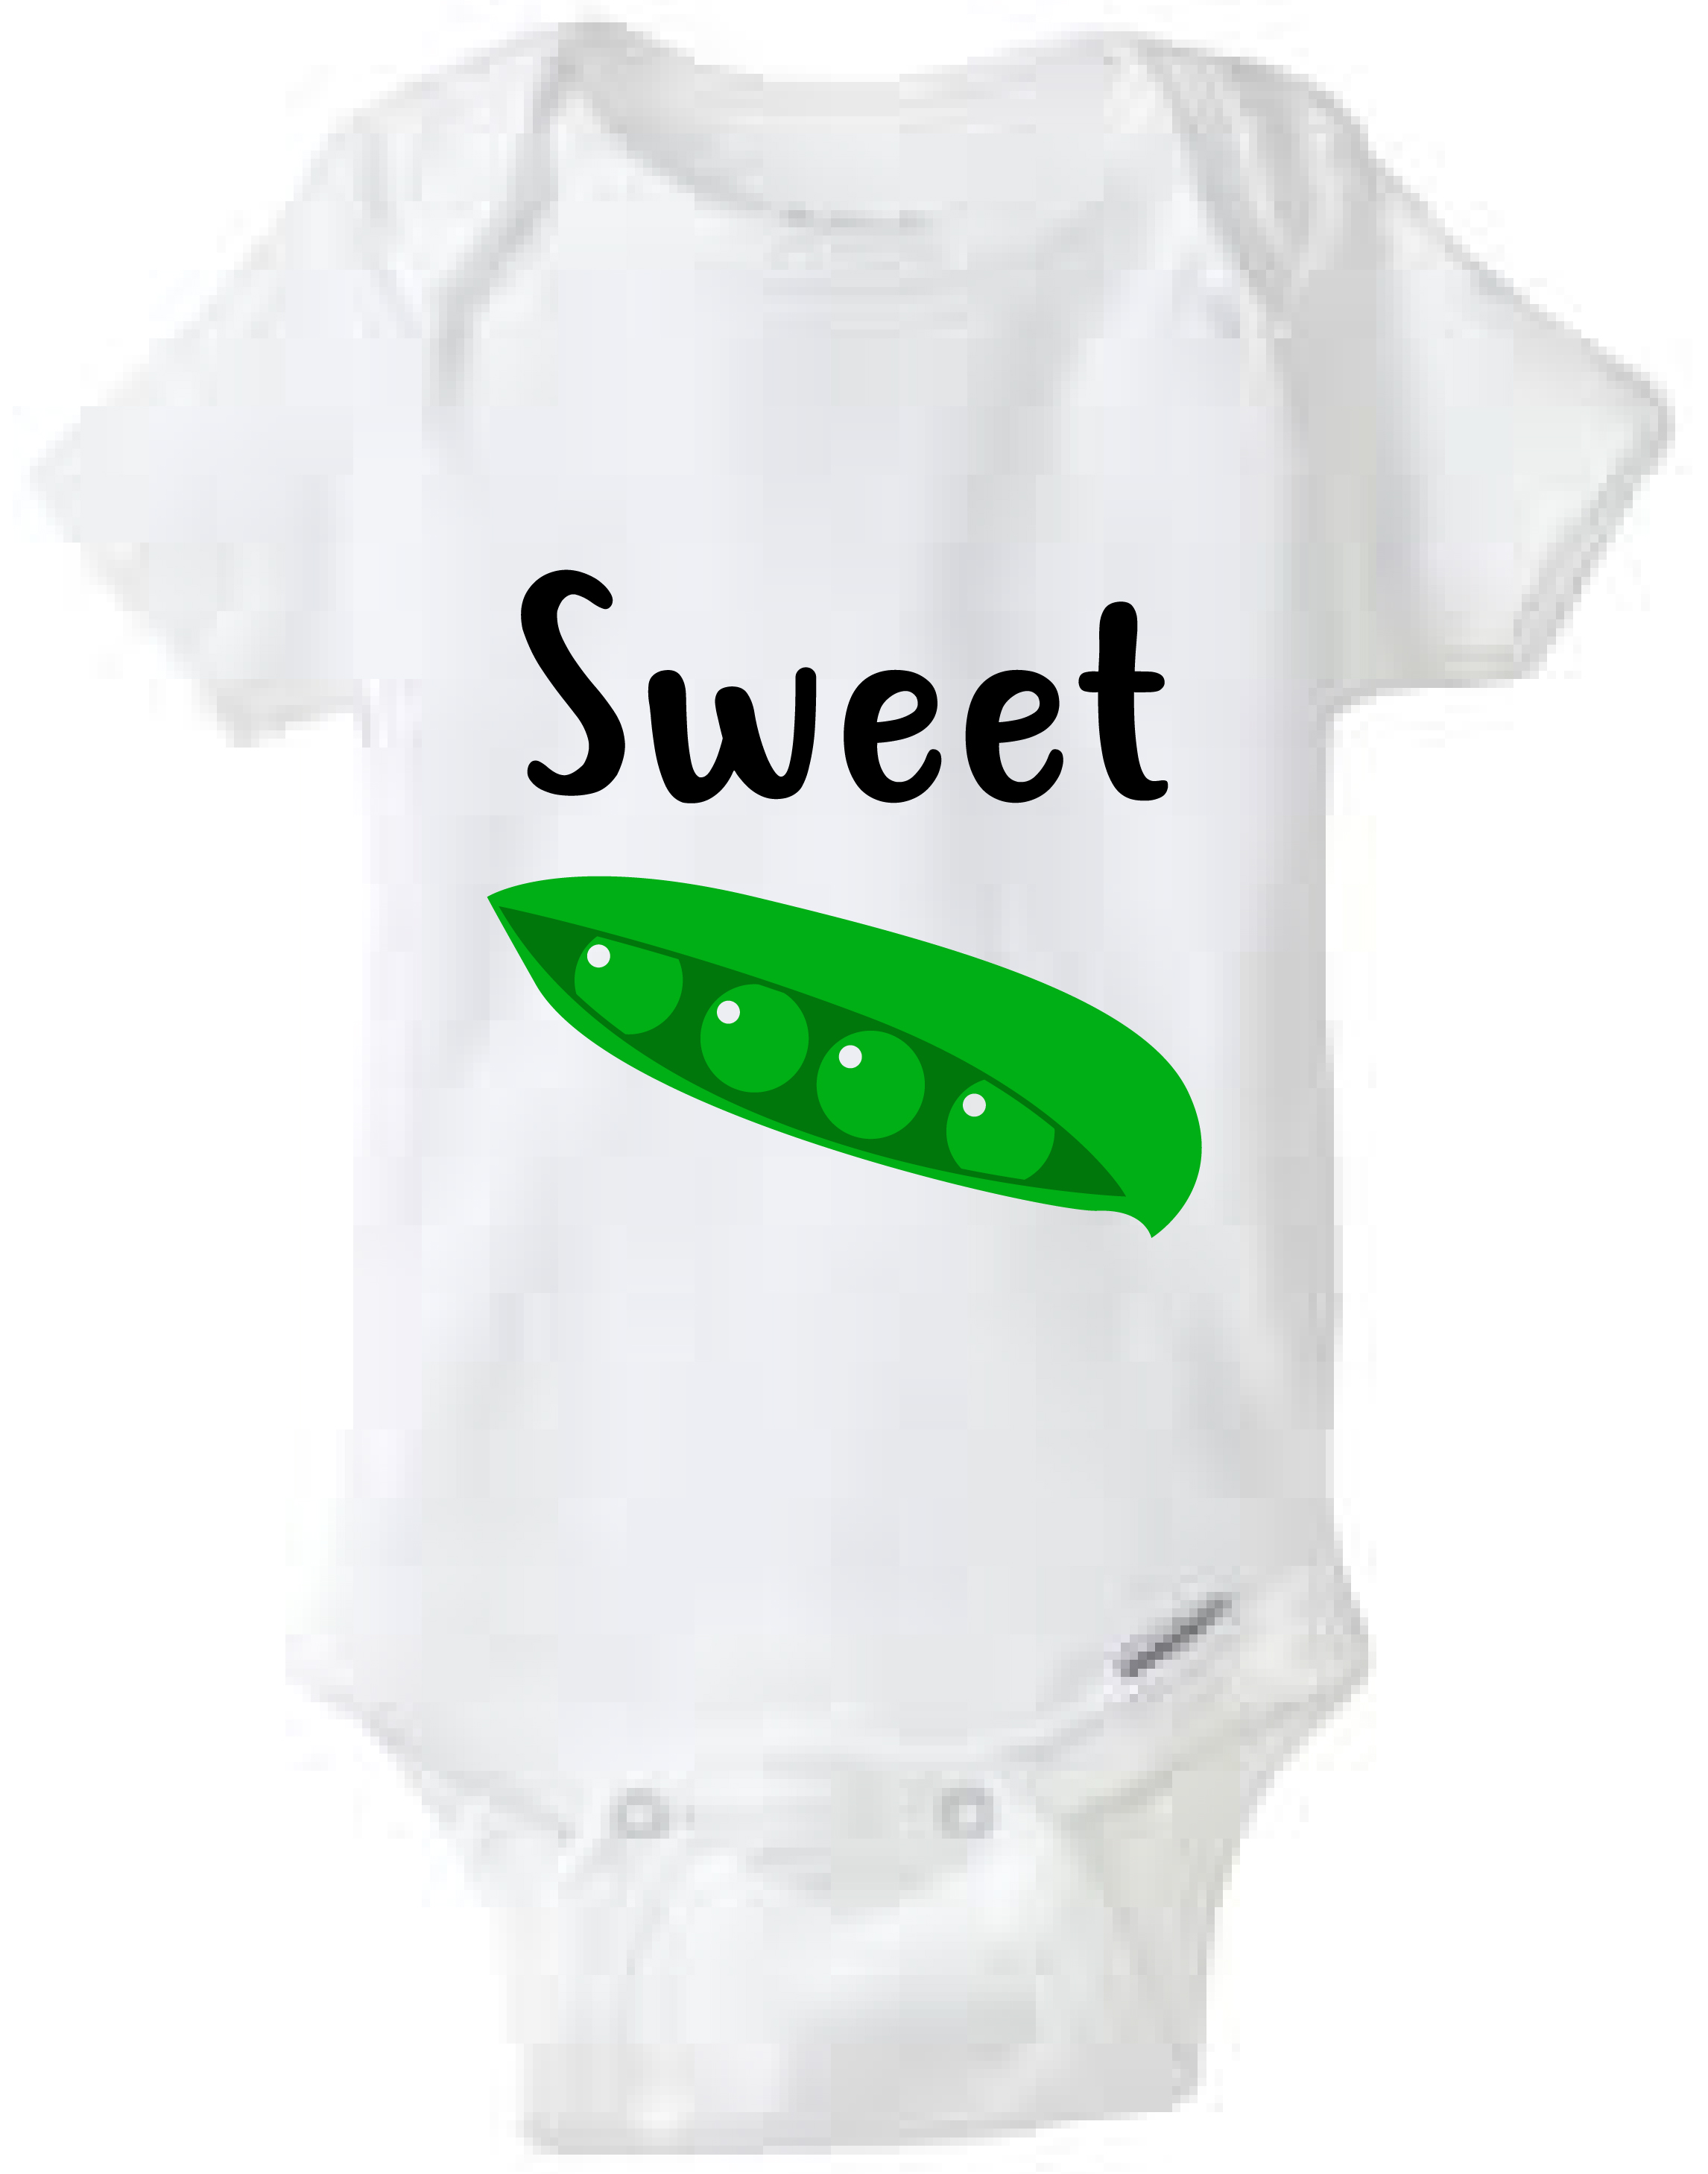 Download Sweet Pea Baby Onesie Design, SVG, DXF, EPS Vector files for use with Cricut or Silhouette Vinyl ...